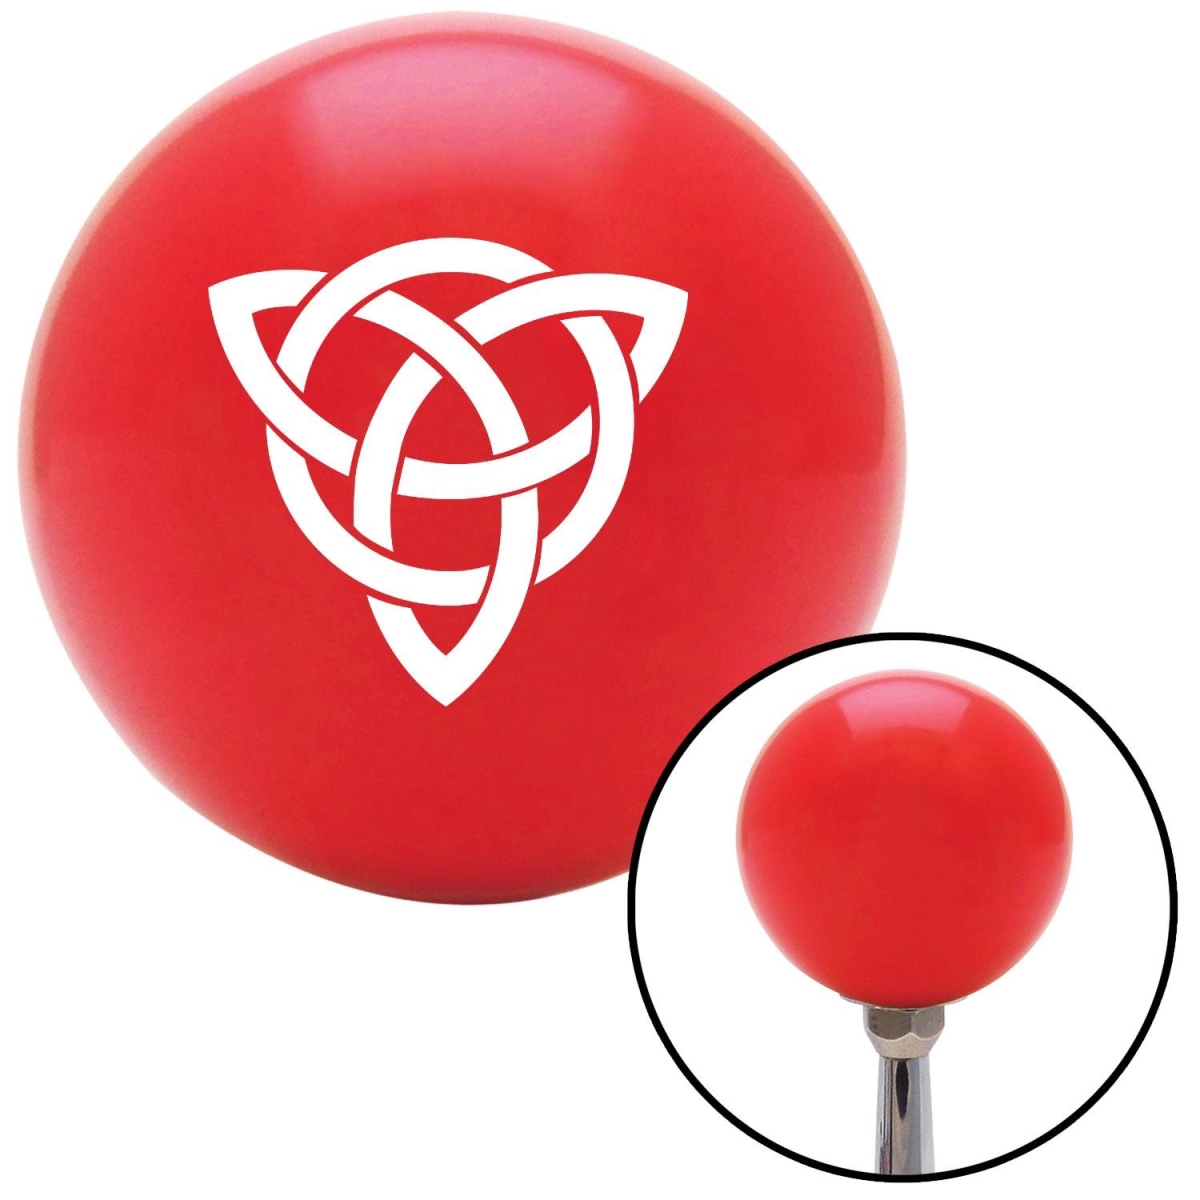 Picture of American Shifter 101586 White Celtic Design No.2 Red Shift Knob with M16 x 1.5 Insert Shifter Auto Manual